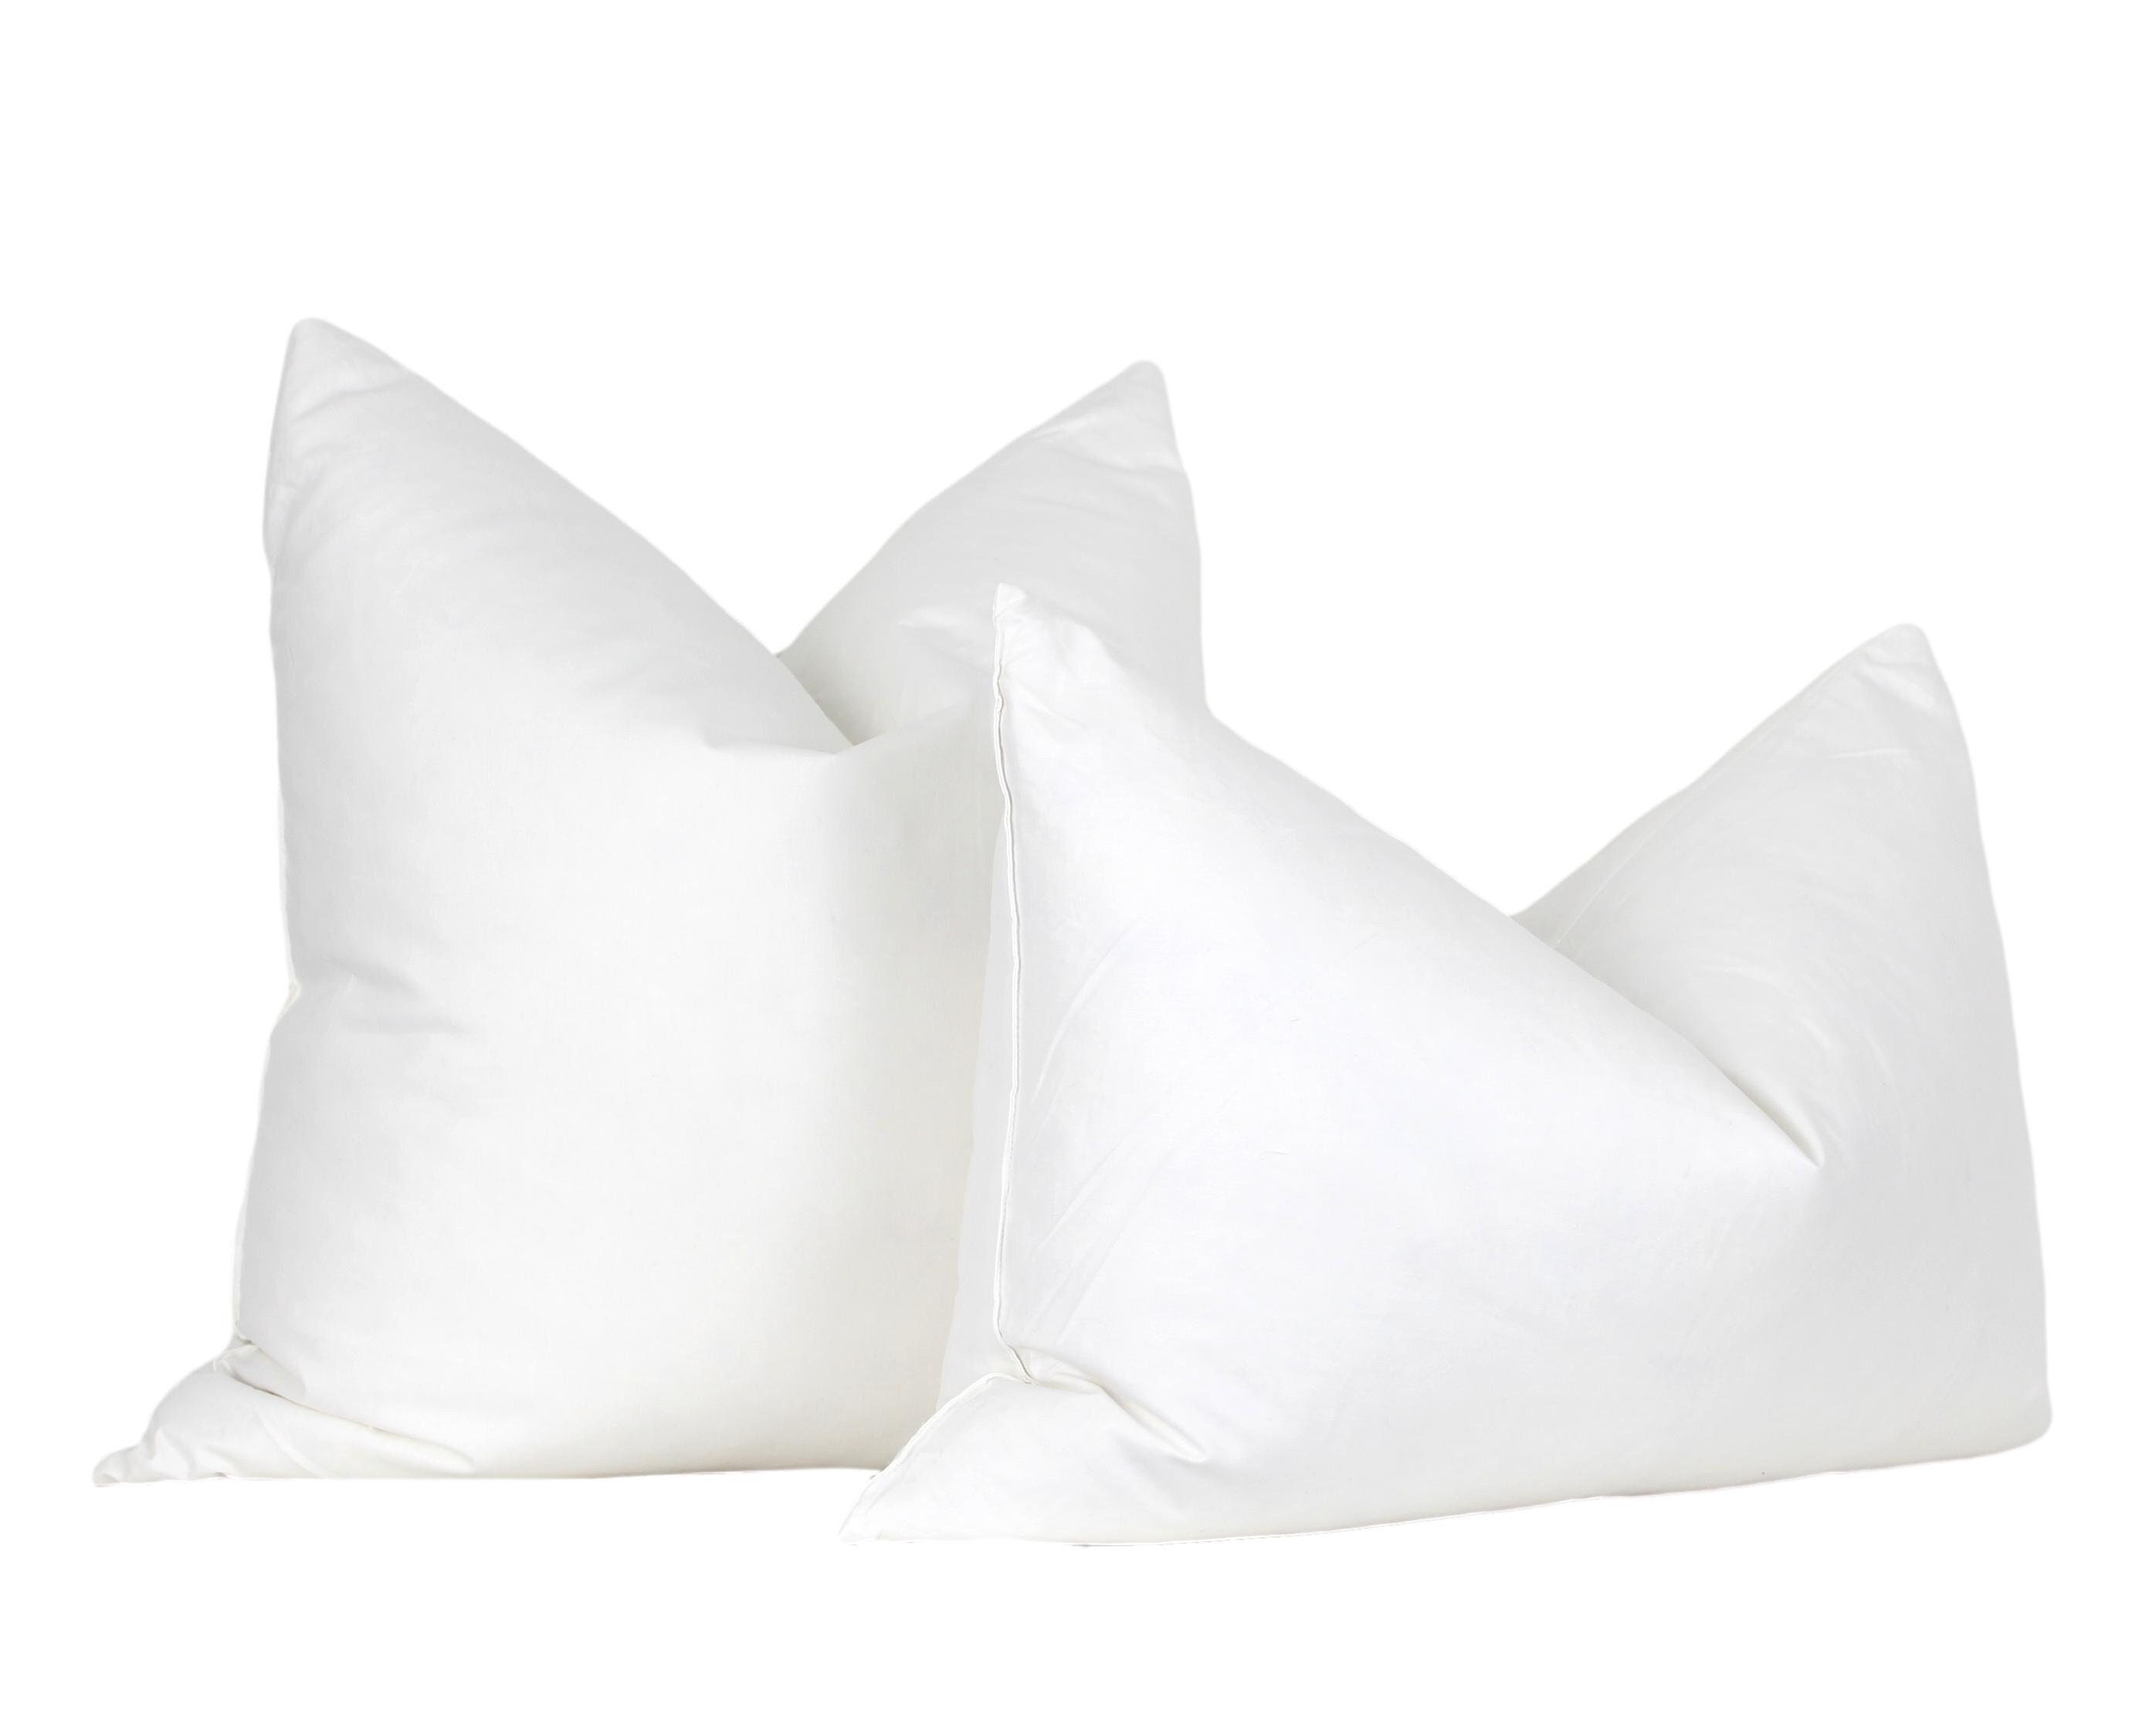 Down Pillow Insert - 100% Downproof Cotton - Knife Edge - 90/10 Feather and  Down Hypoallergenic Fill - 18x18 - Premium Quality